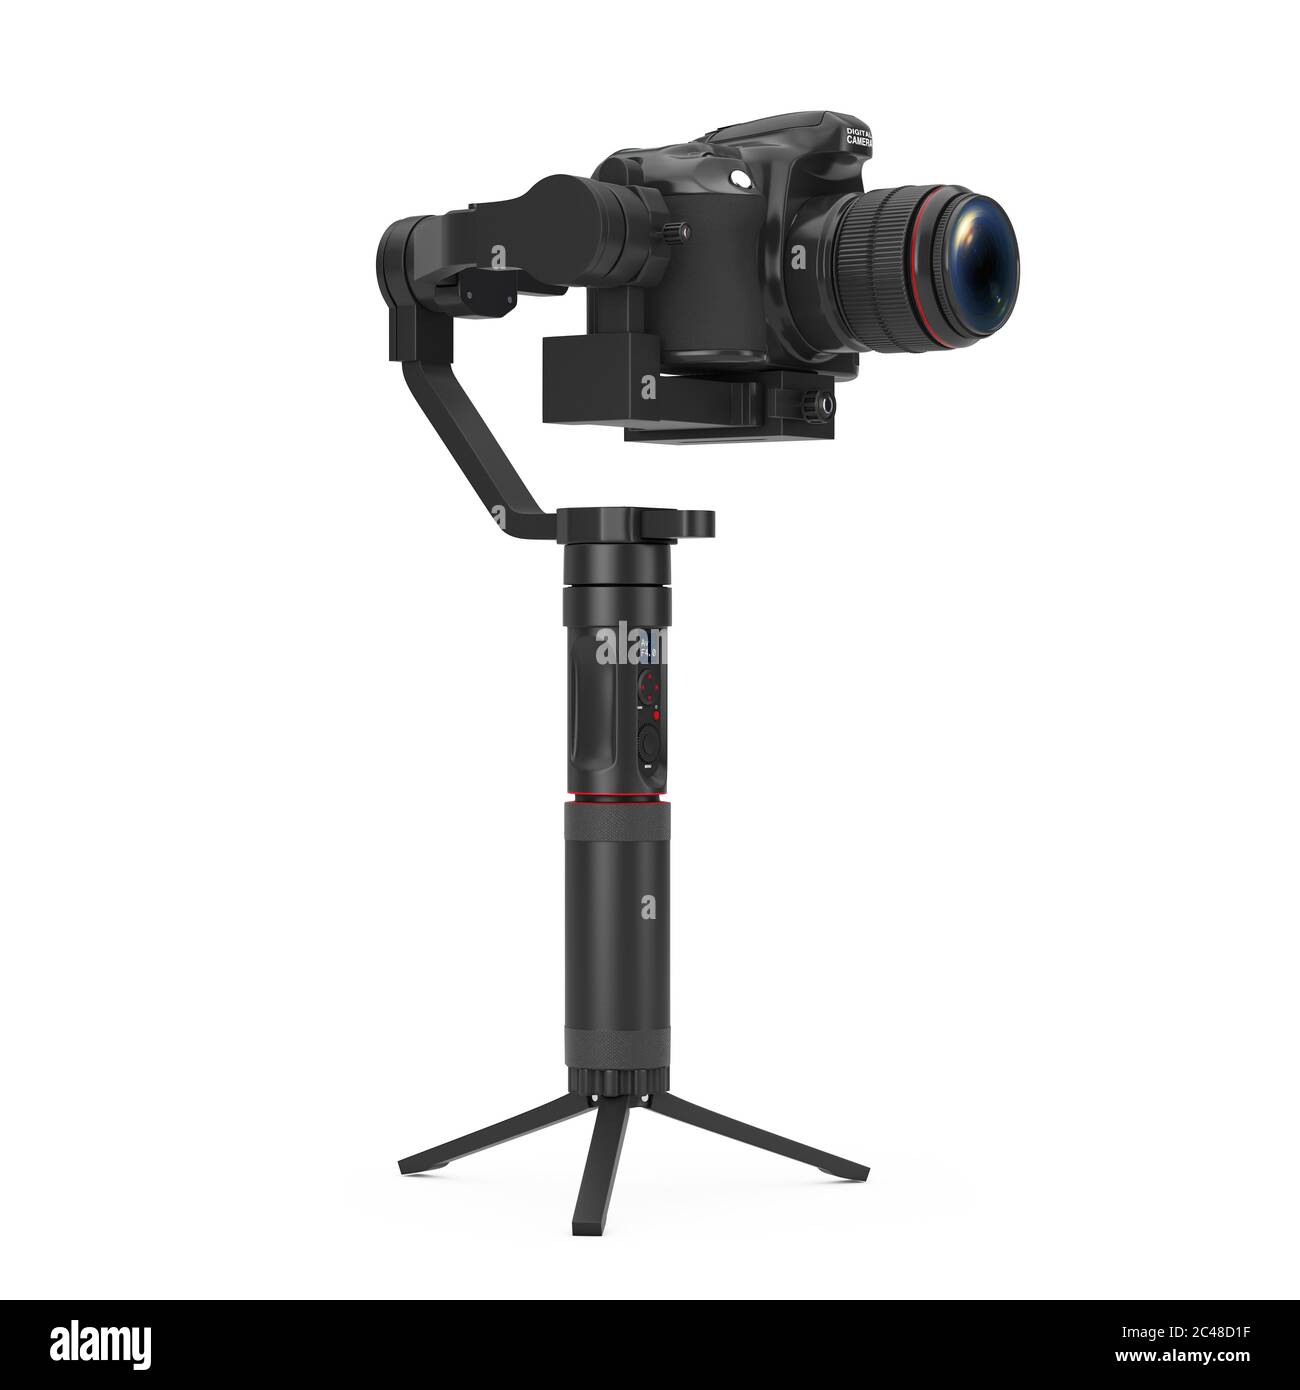 DSLR or Video Camera Gimbal Stabilization Tripod System on a white  background. 3d Rendering Stock Photo - Alamy